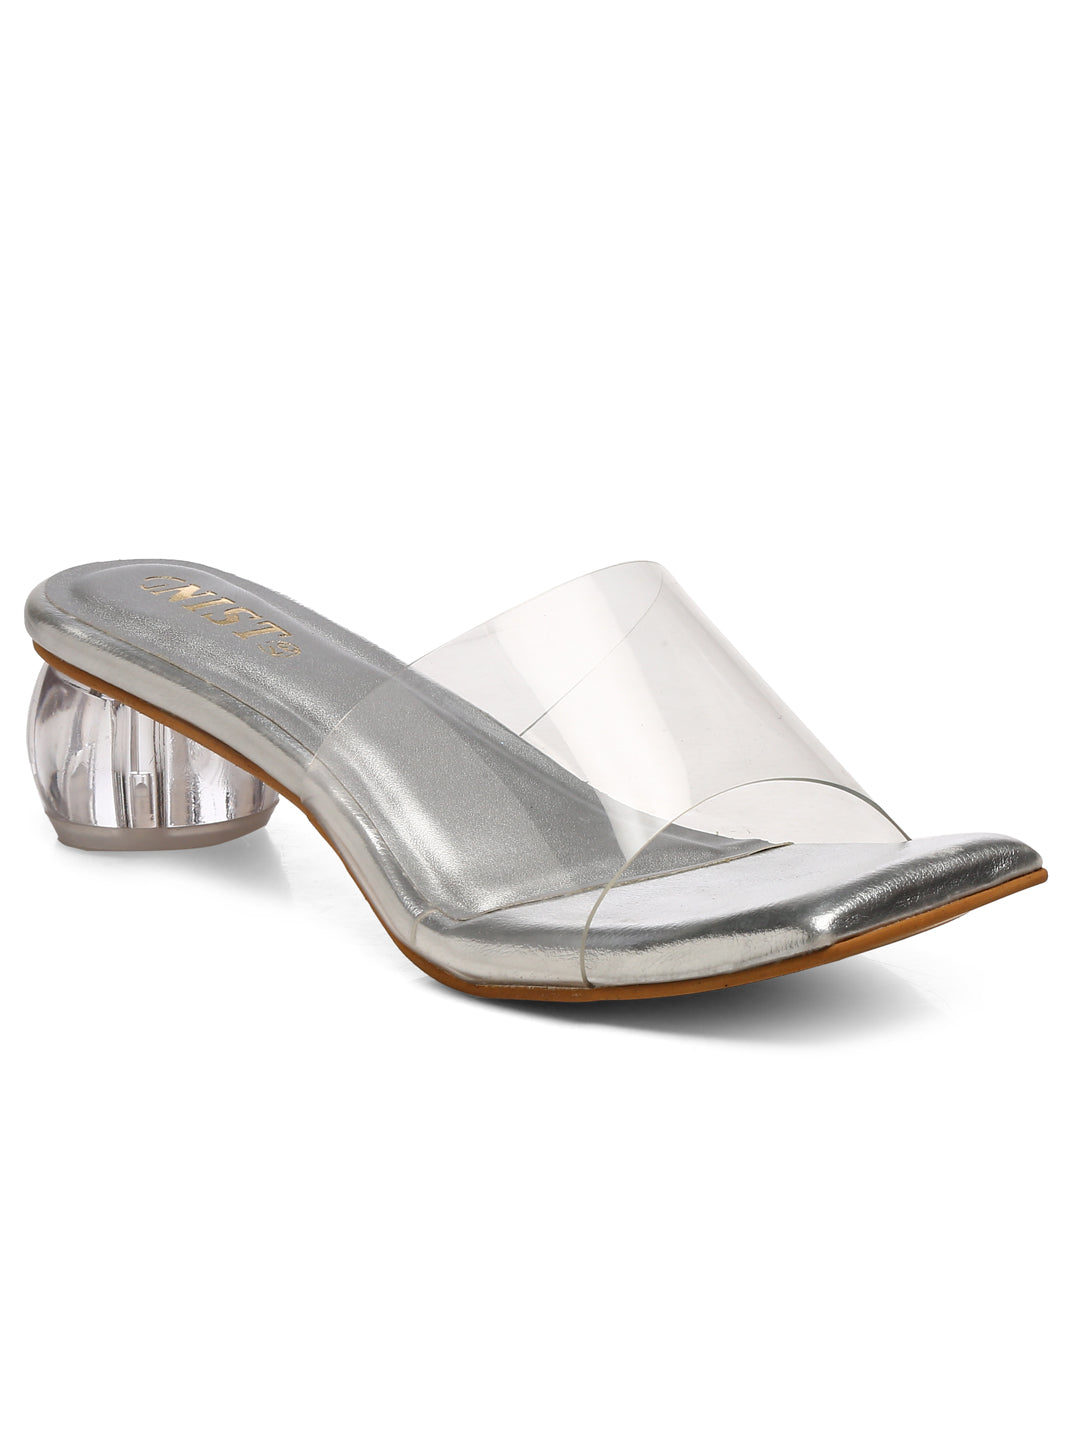 GNIST Silver Twin Strap Transparent Clear Block Heels